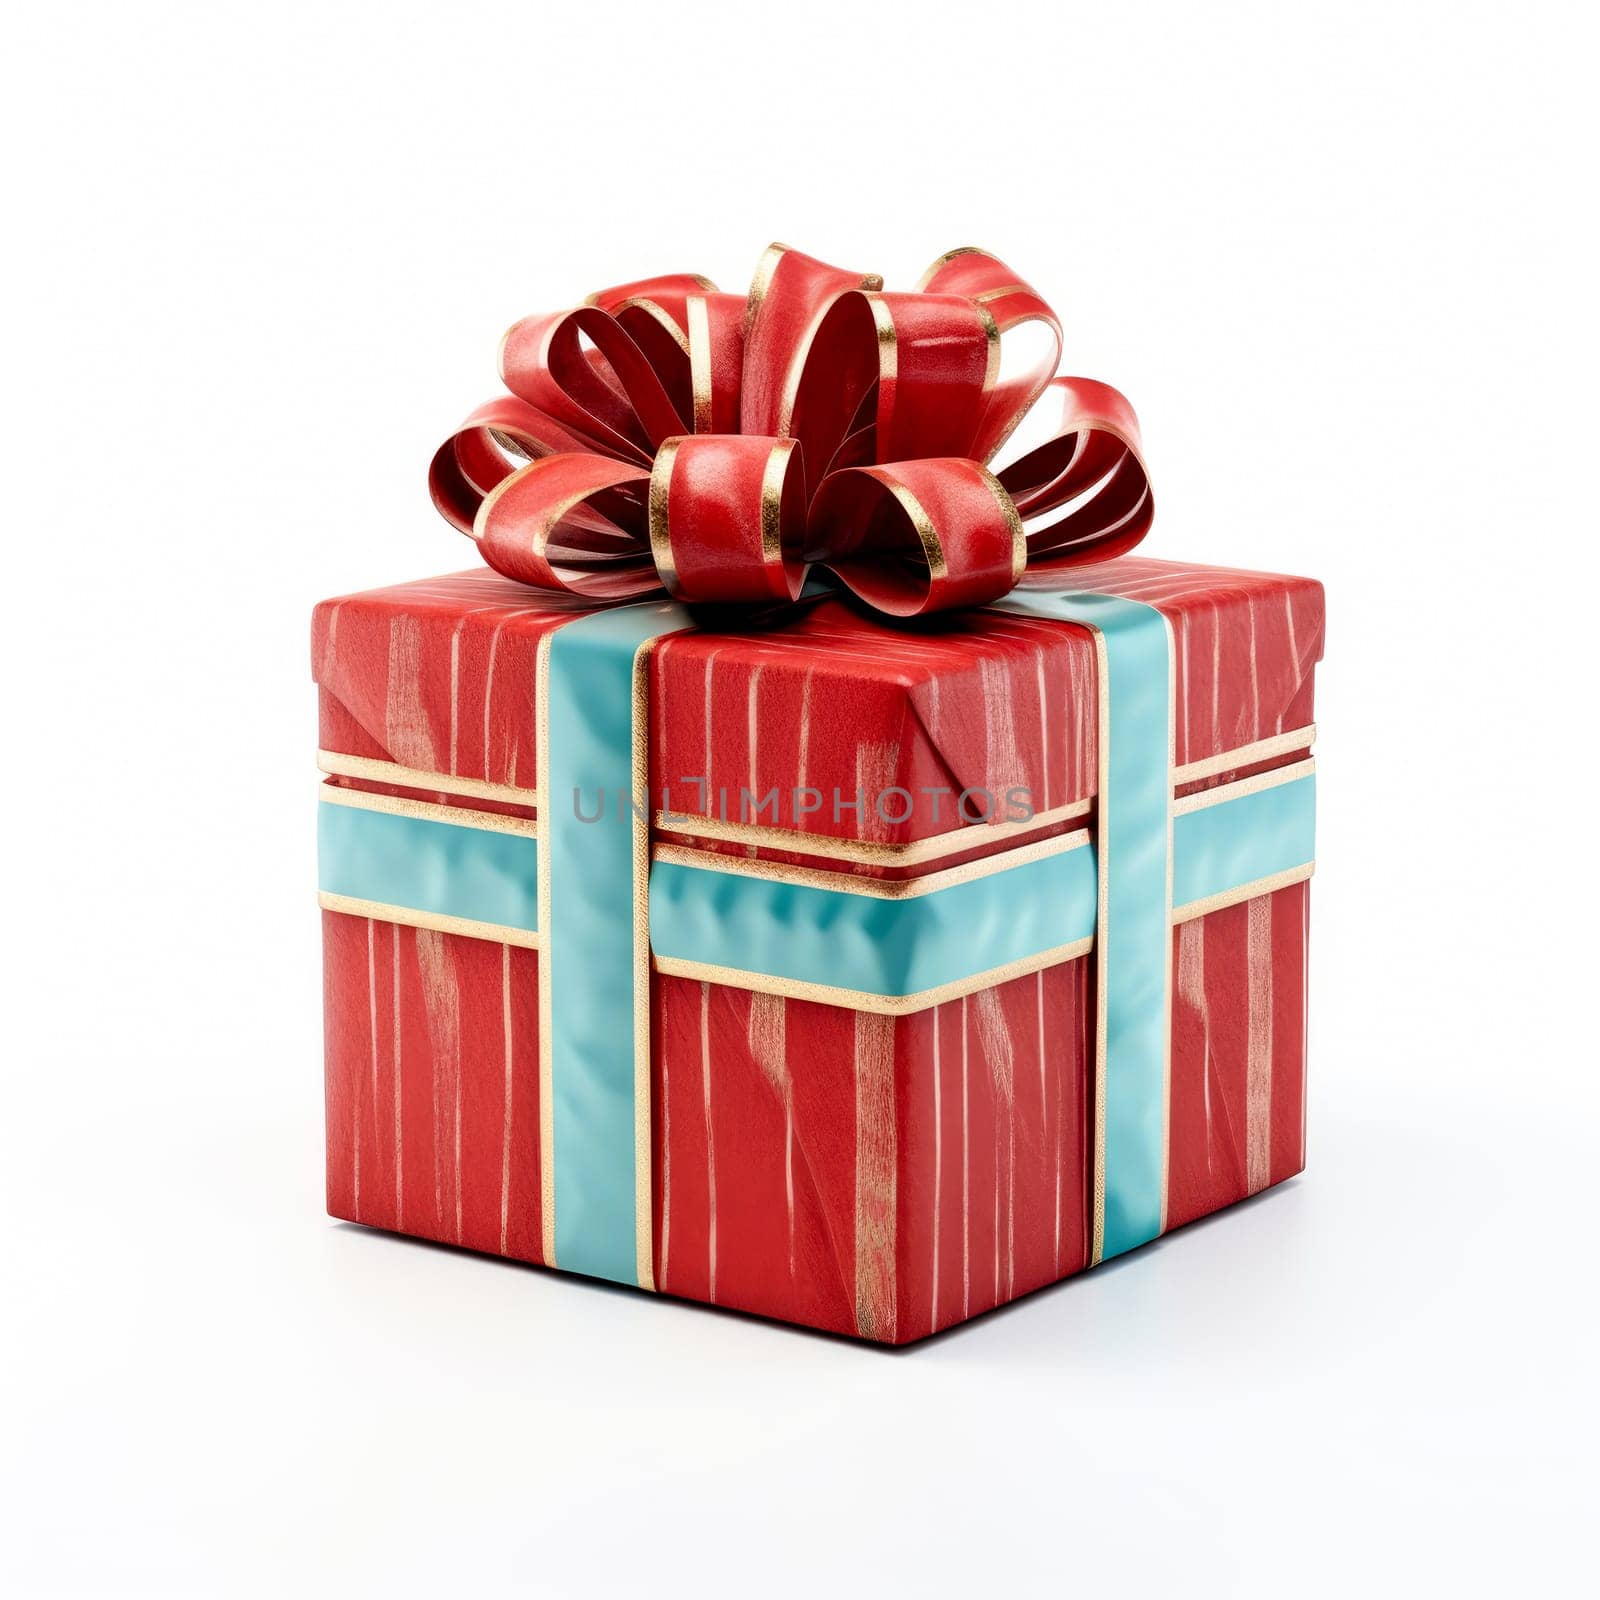 Red gift box with a beautiful bow, on a white background. Isolated object, white background.